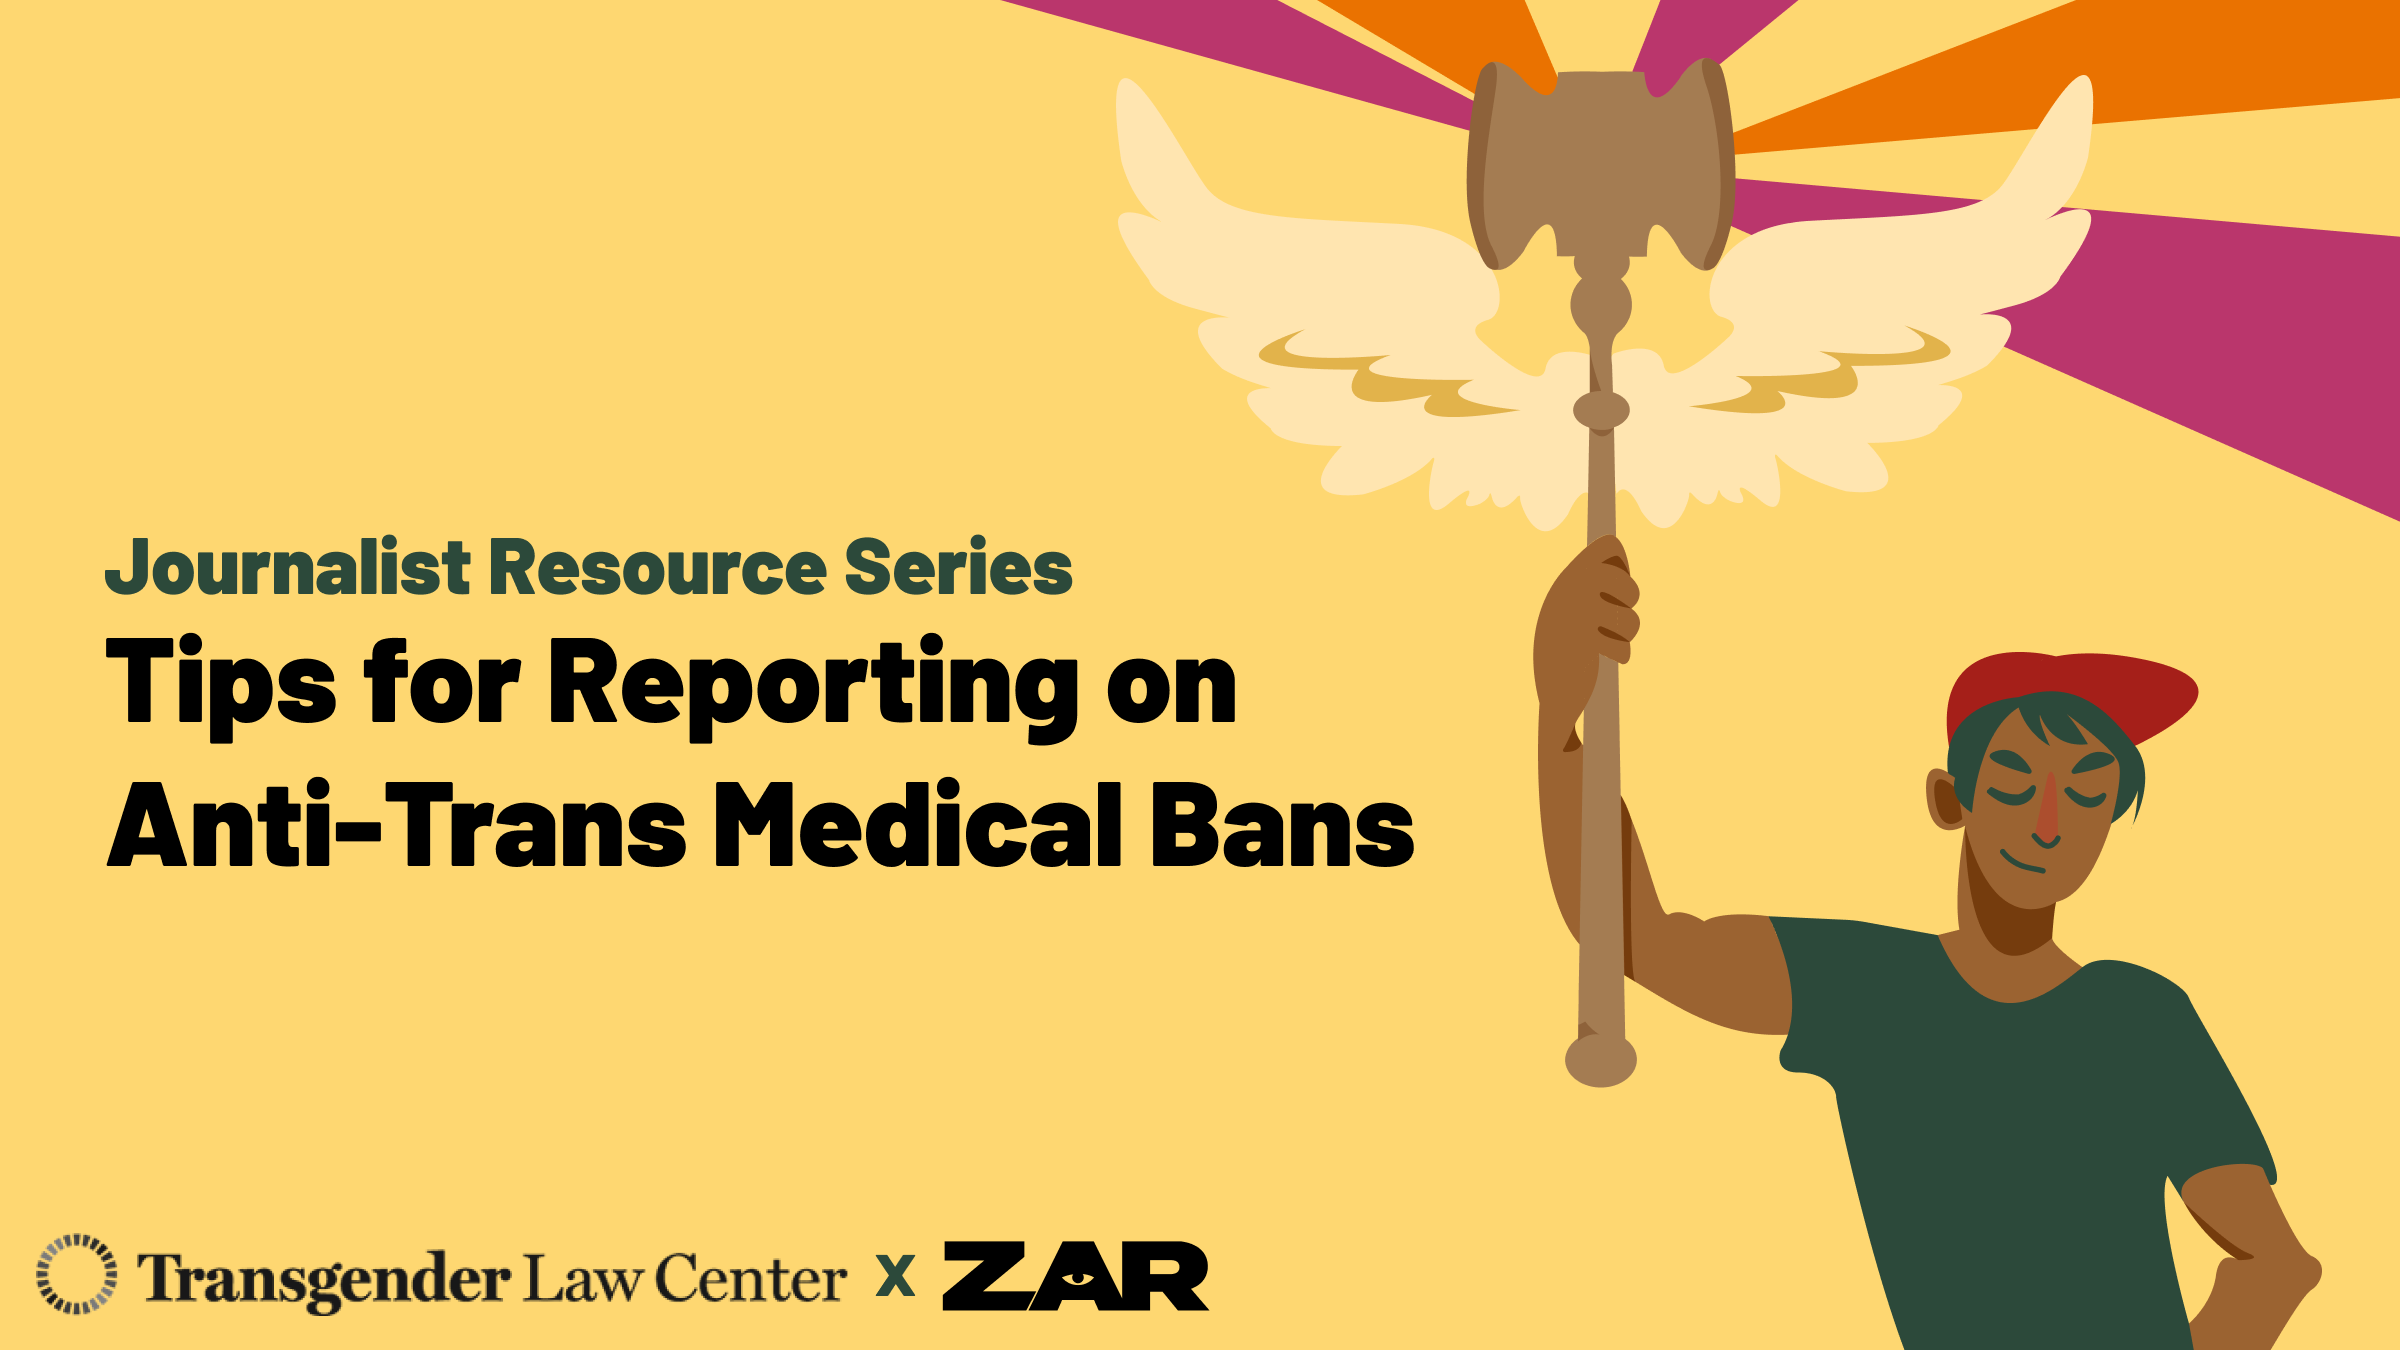 Illustrated image of a person holding a winged staff. Text reads: Journalist Resource Series Tips for Reporting on Anti-Trans Medical Bans. Branded with the logos for Transgender Law Center and Zar